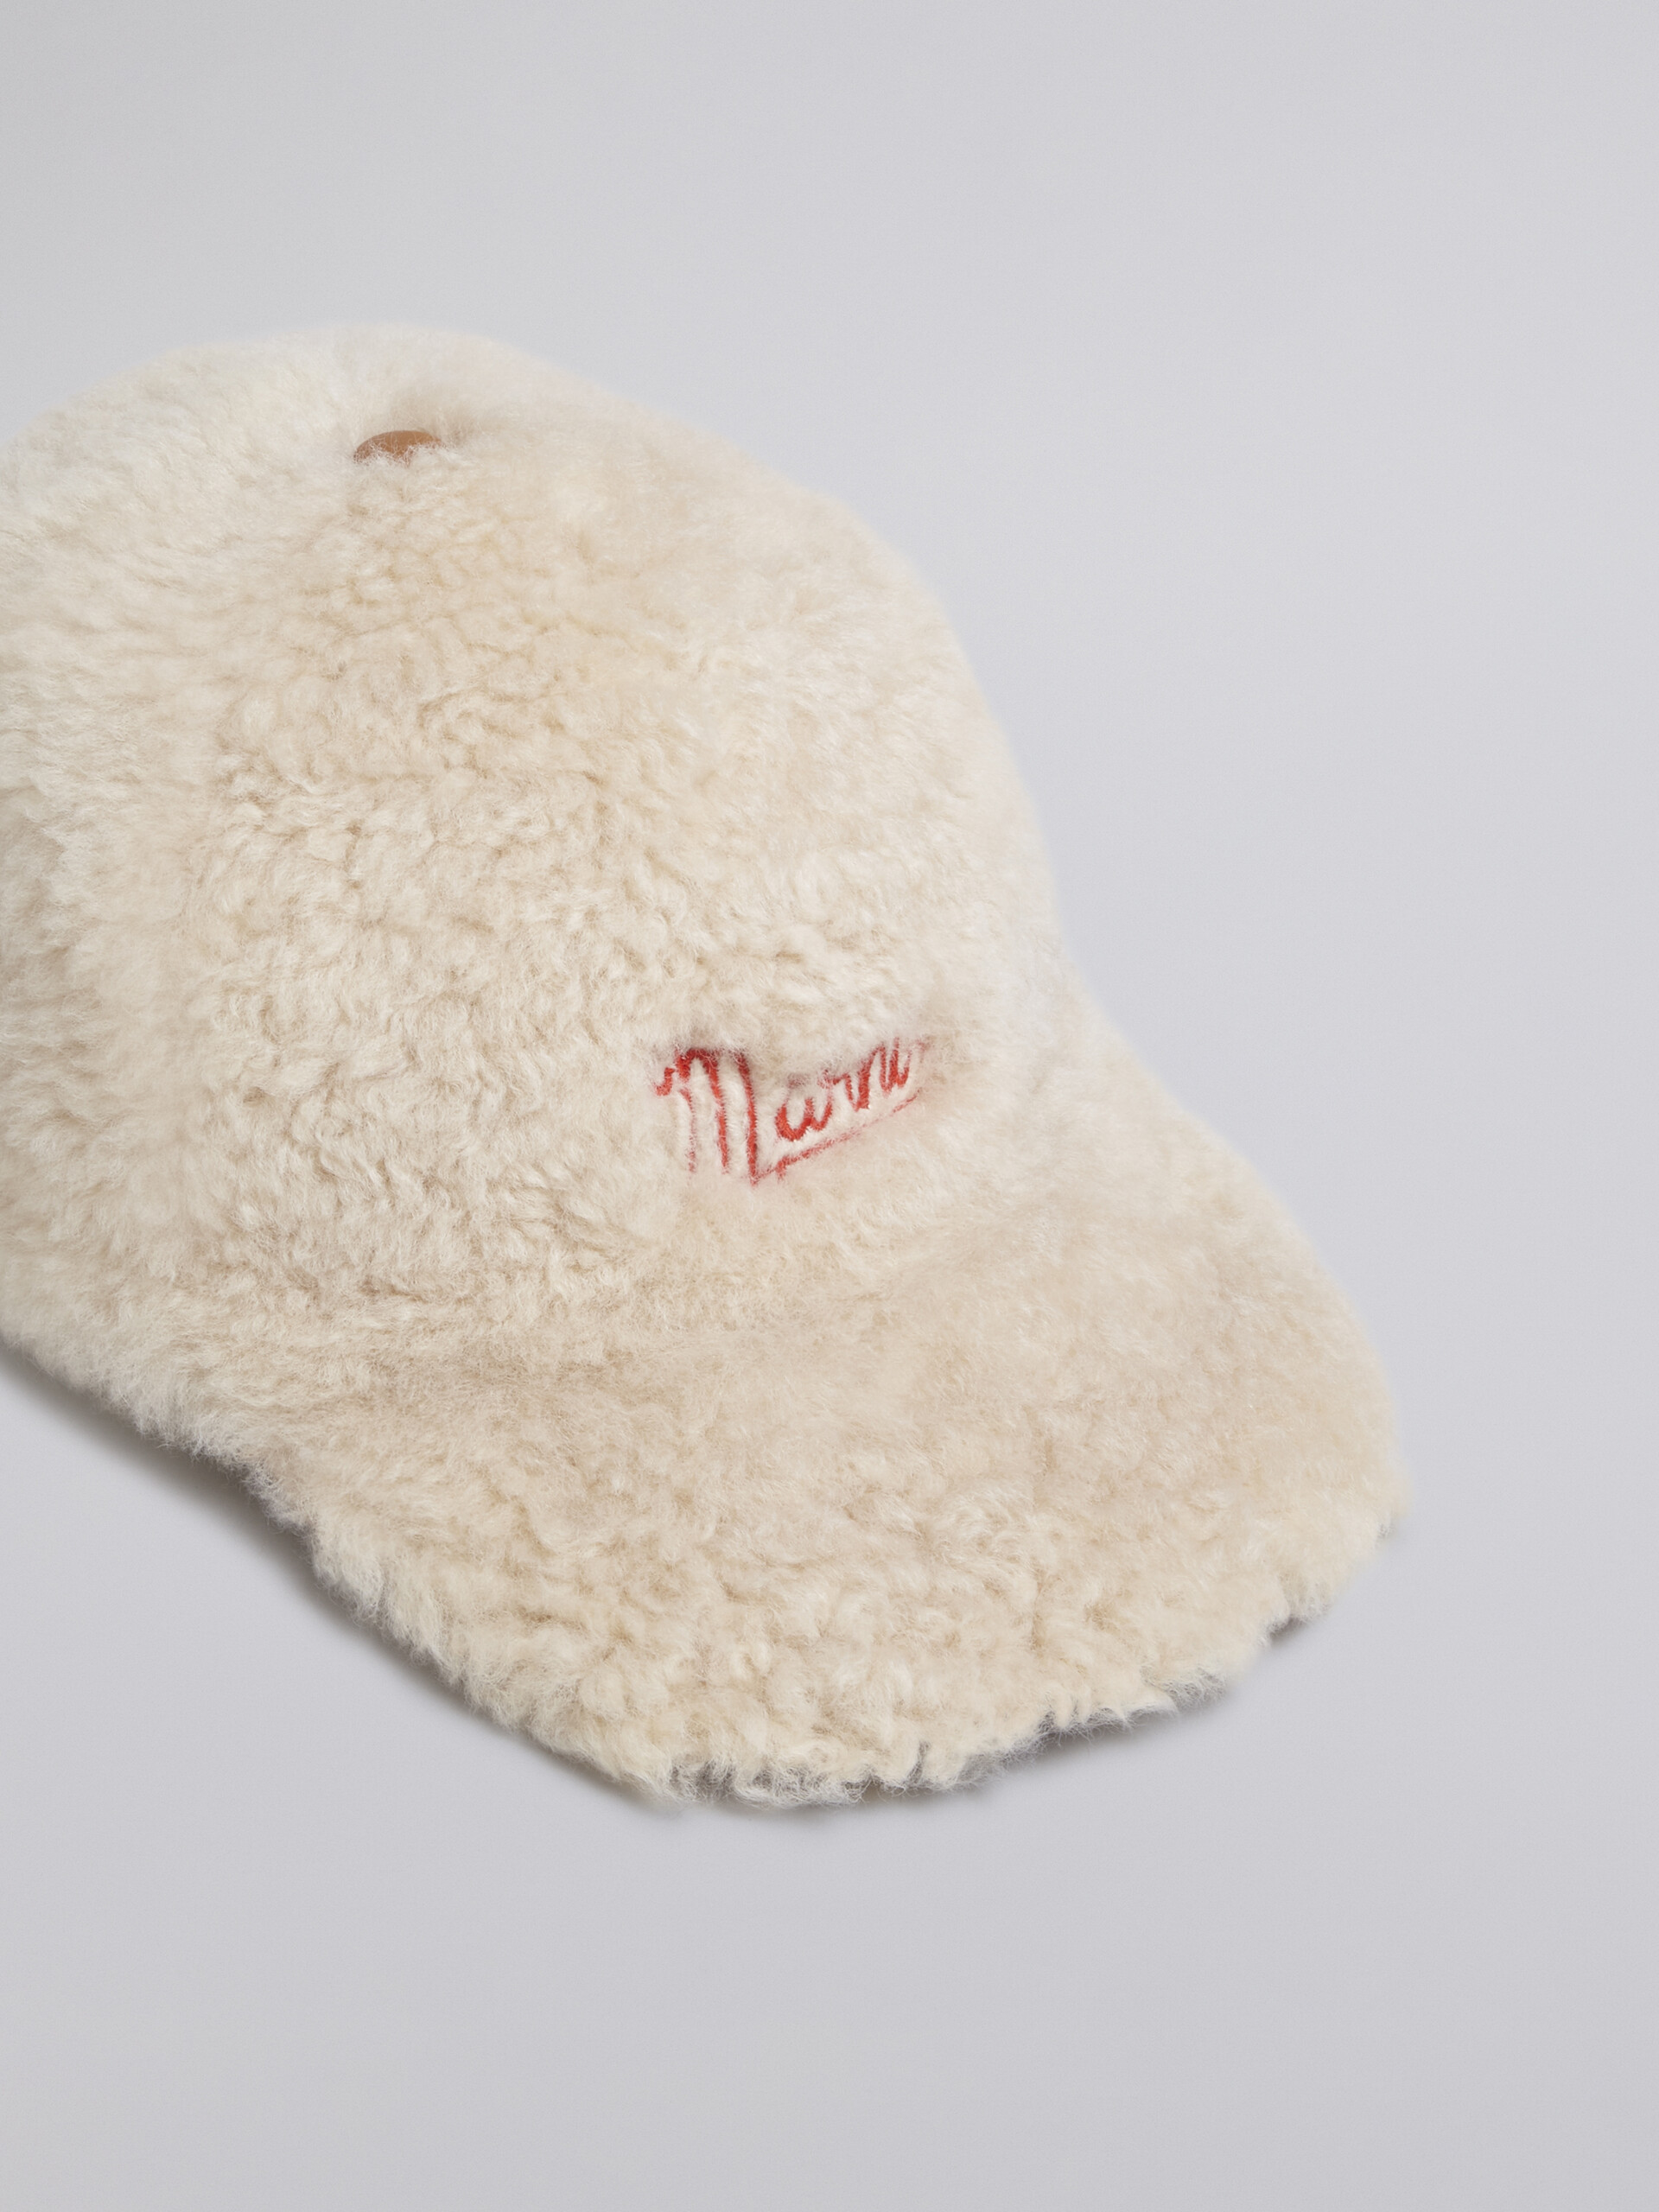 Shearling beanie with contrasting embroidered Marni logo - Hats - Image 3